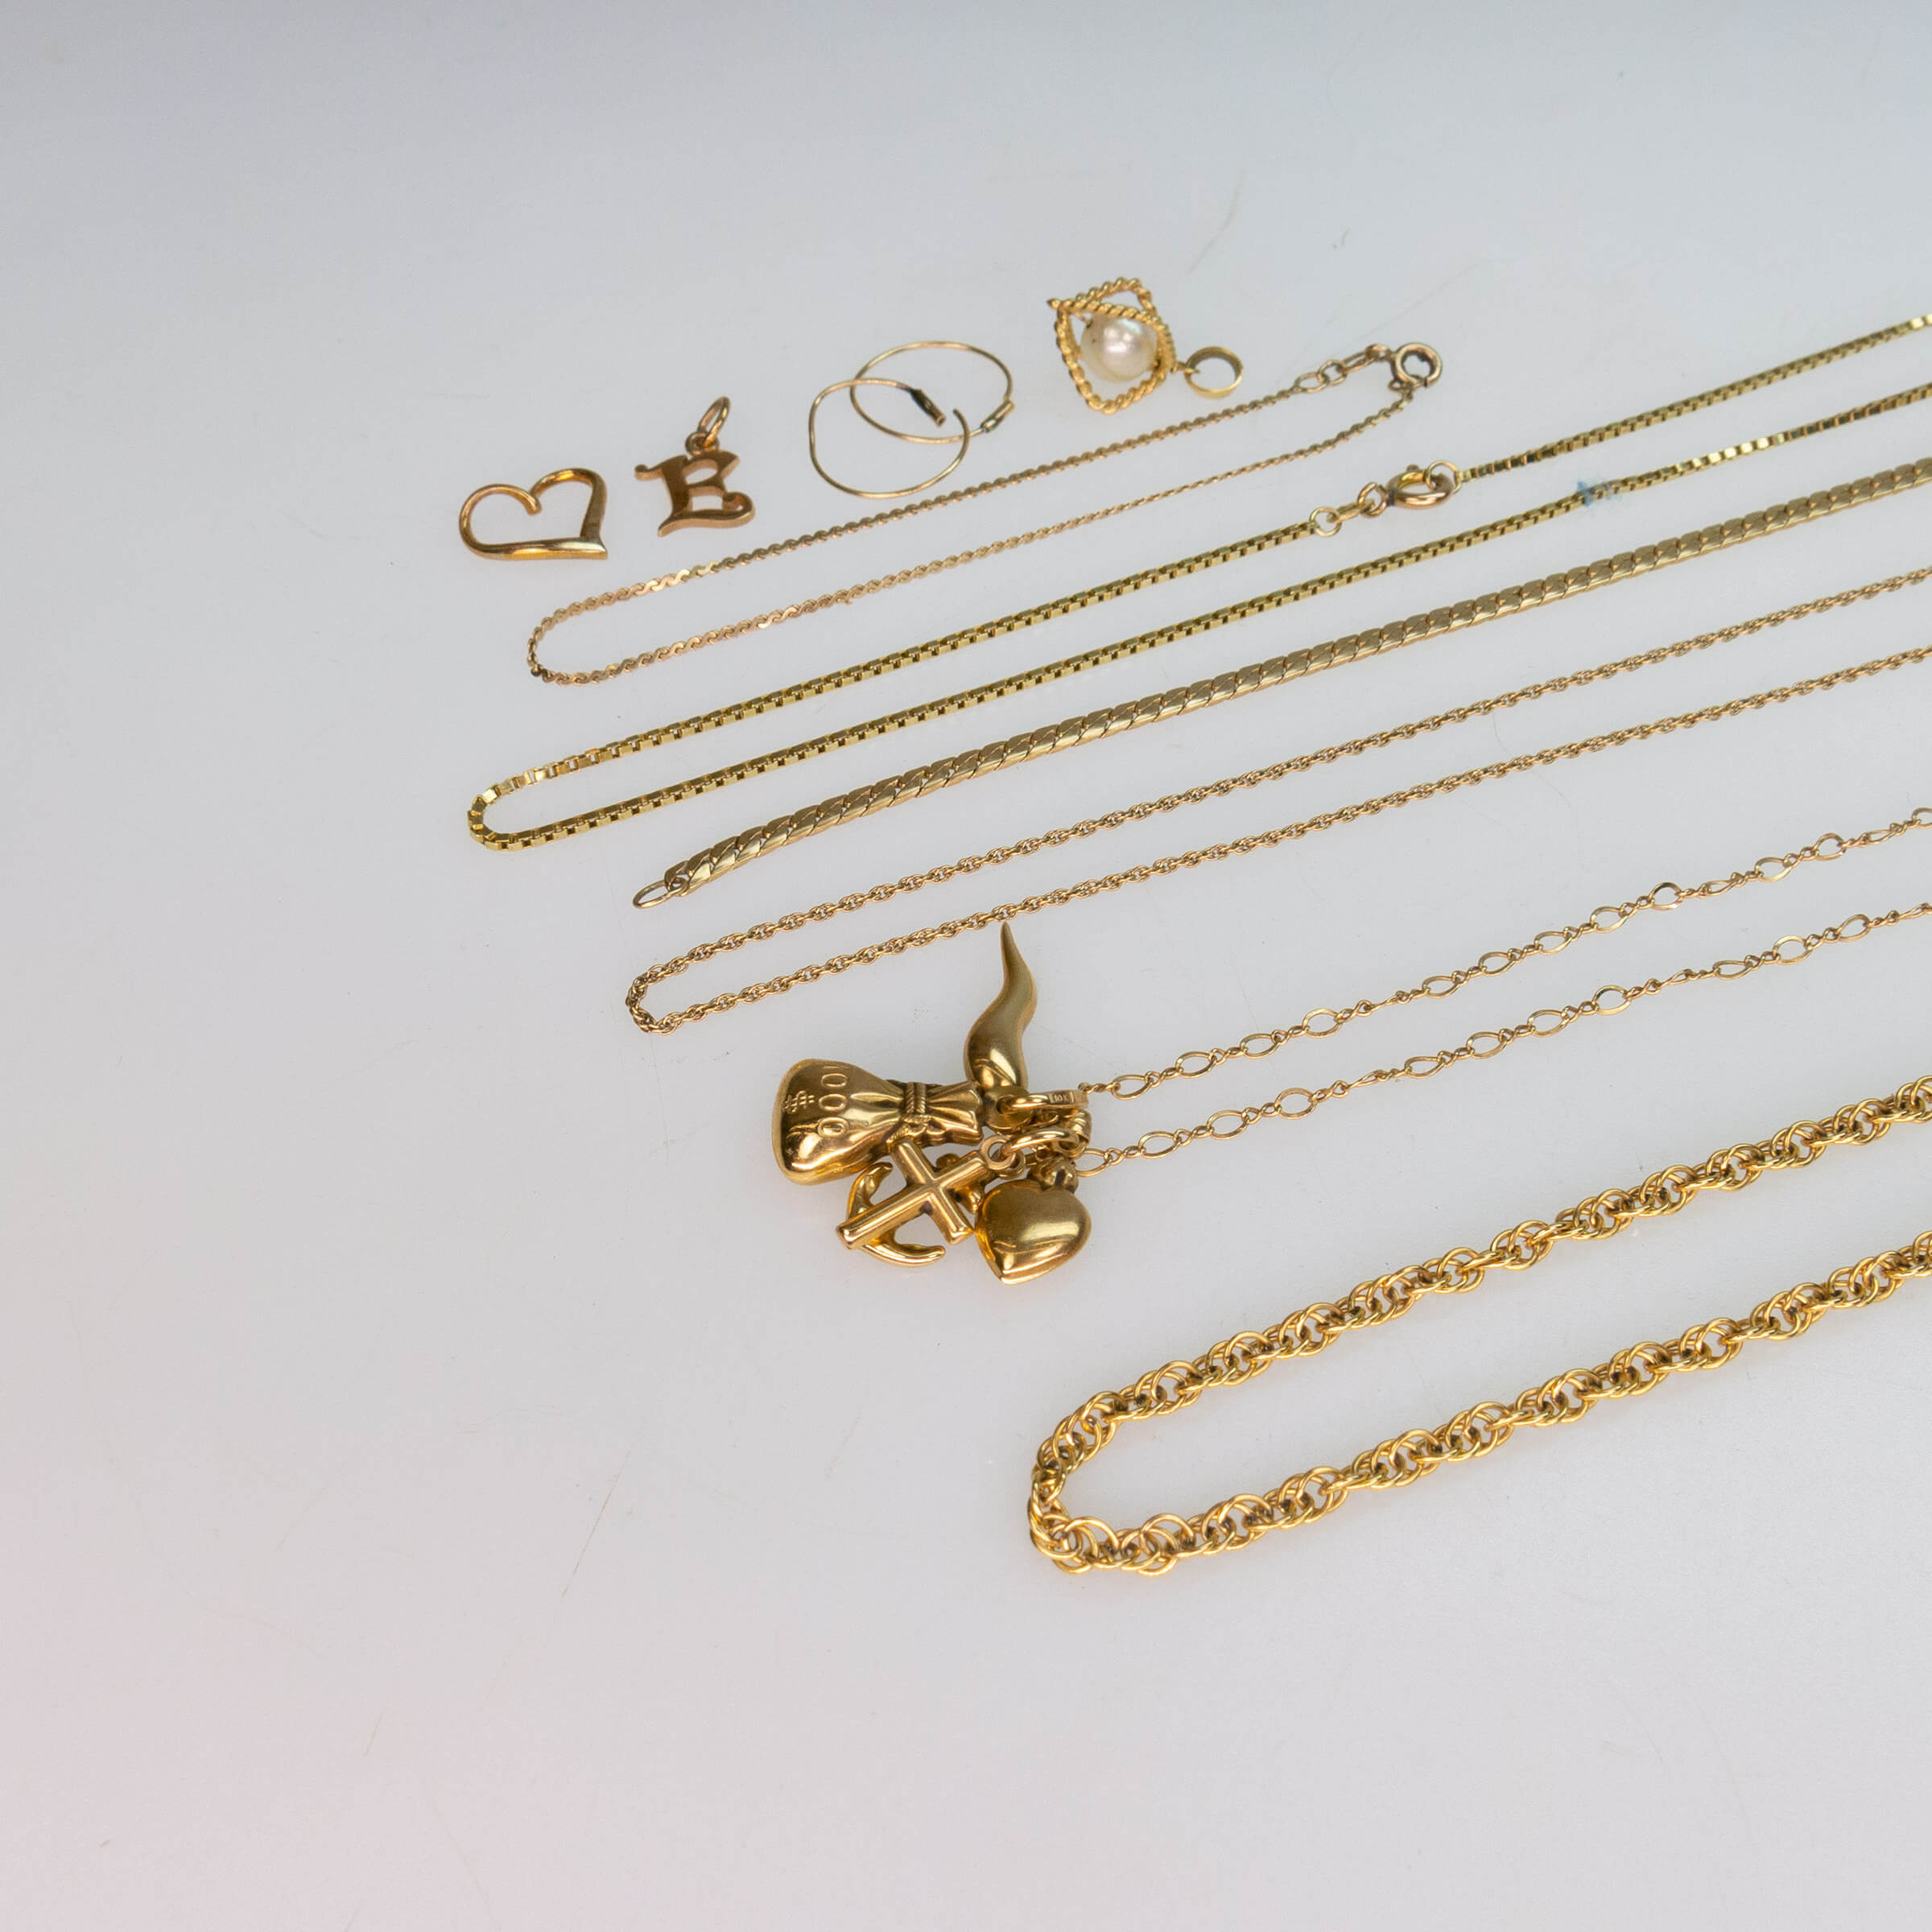 Small Quantity Of Various Gold Chains, Bracelets, and Charms